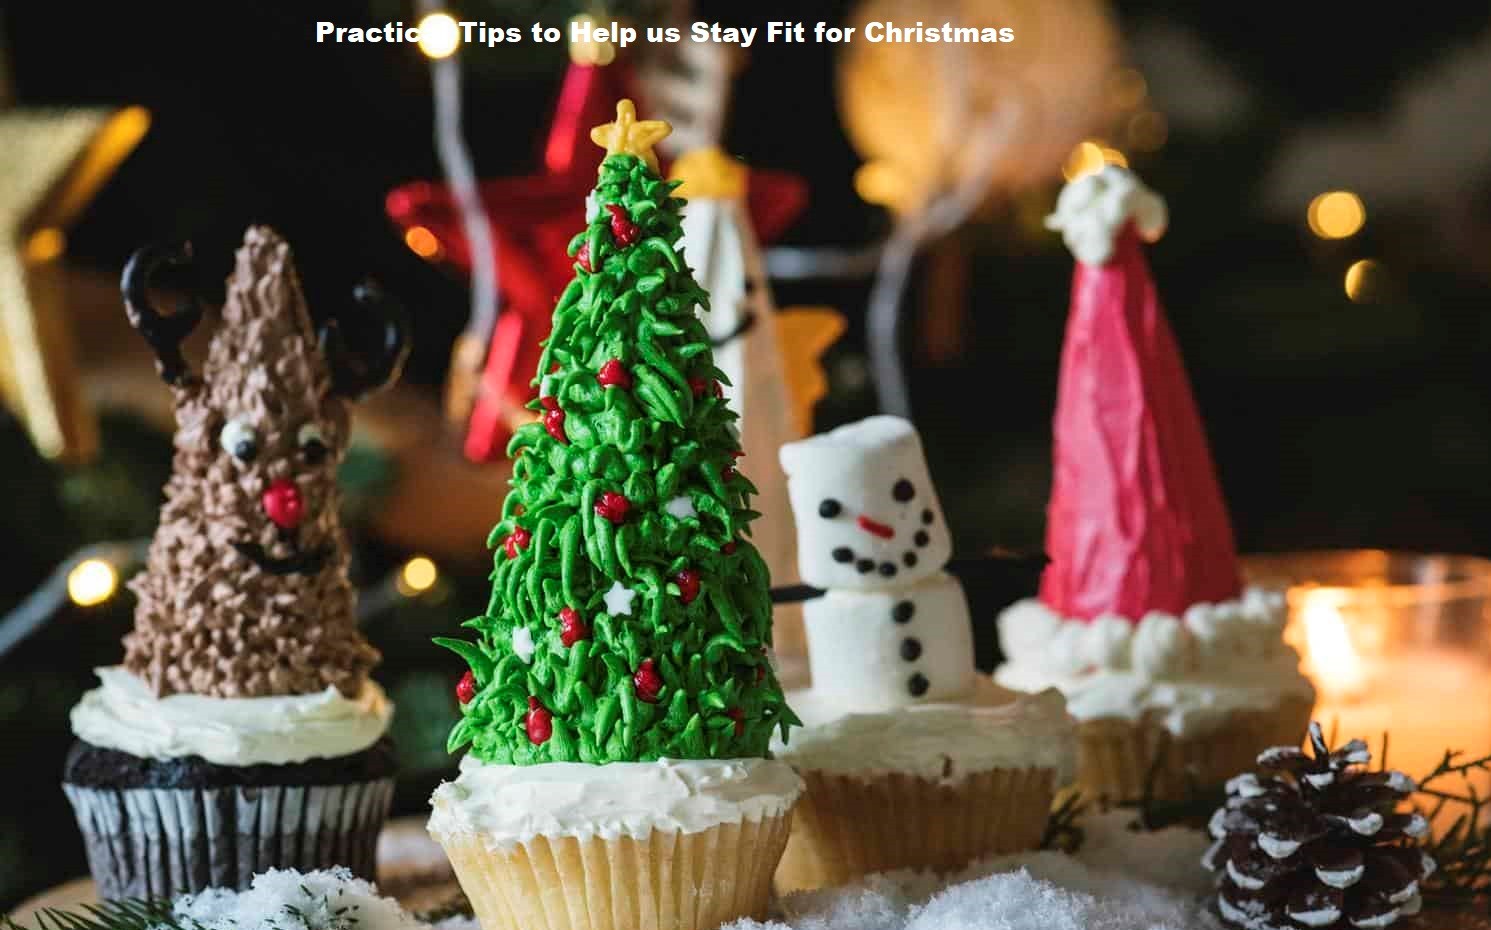 Practical Tips to Help us Stay Fit for Christmas